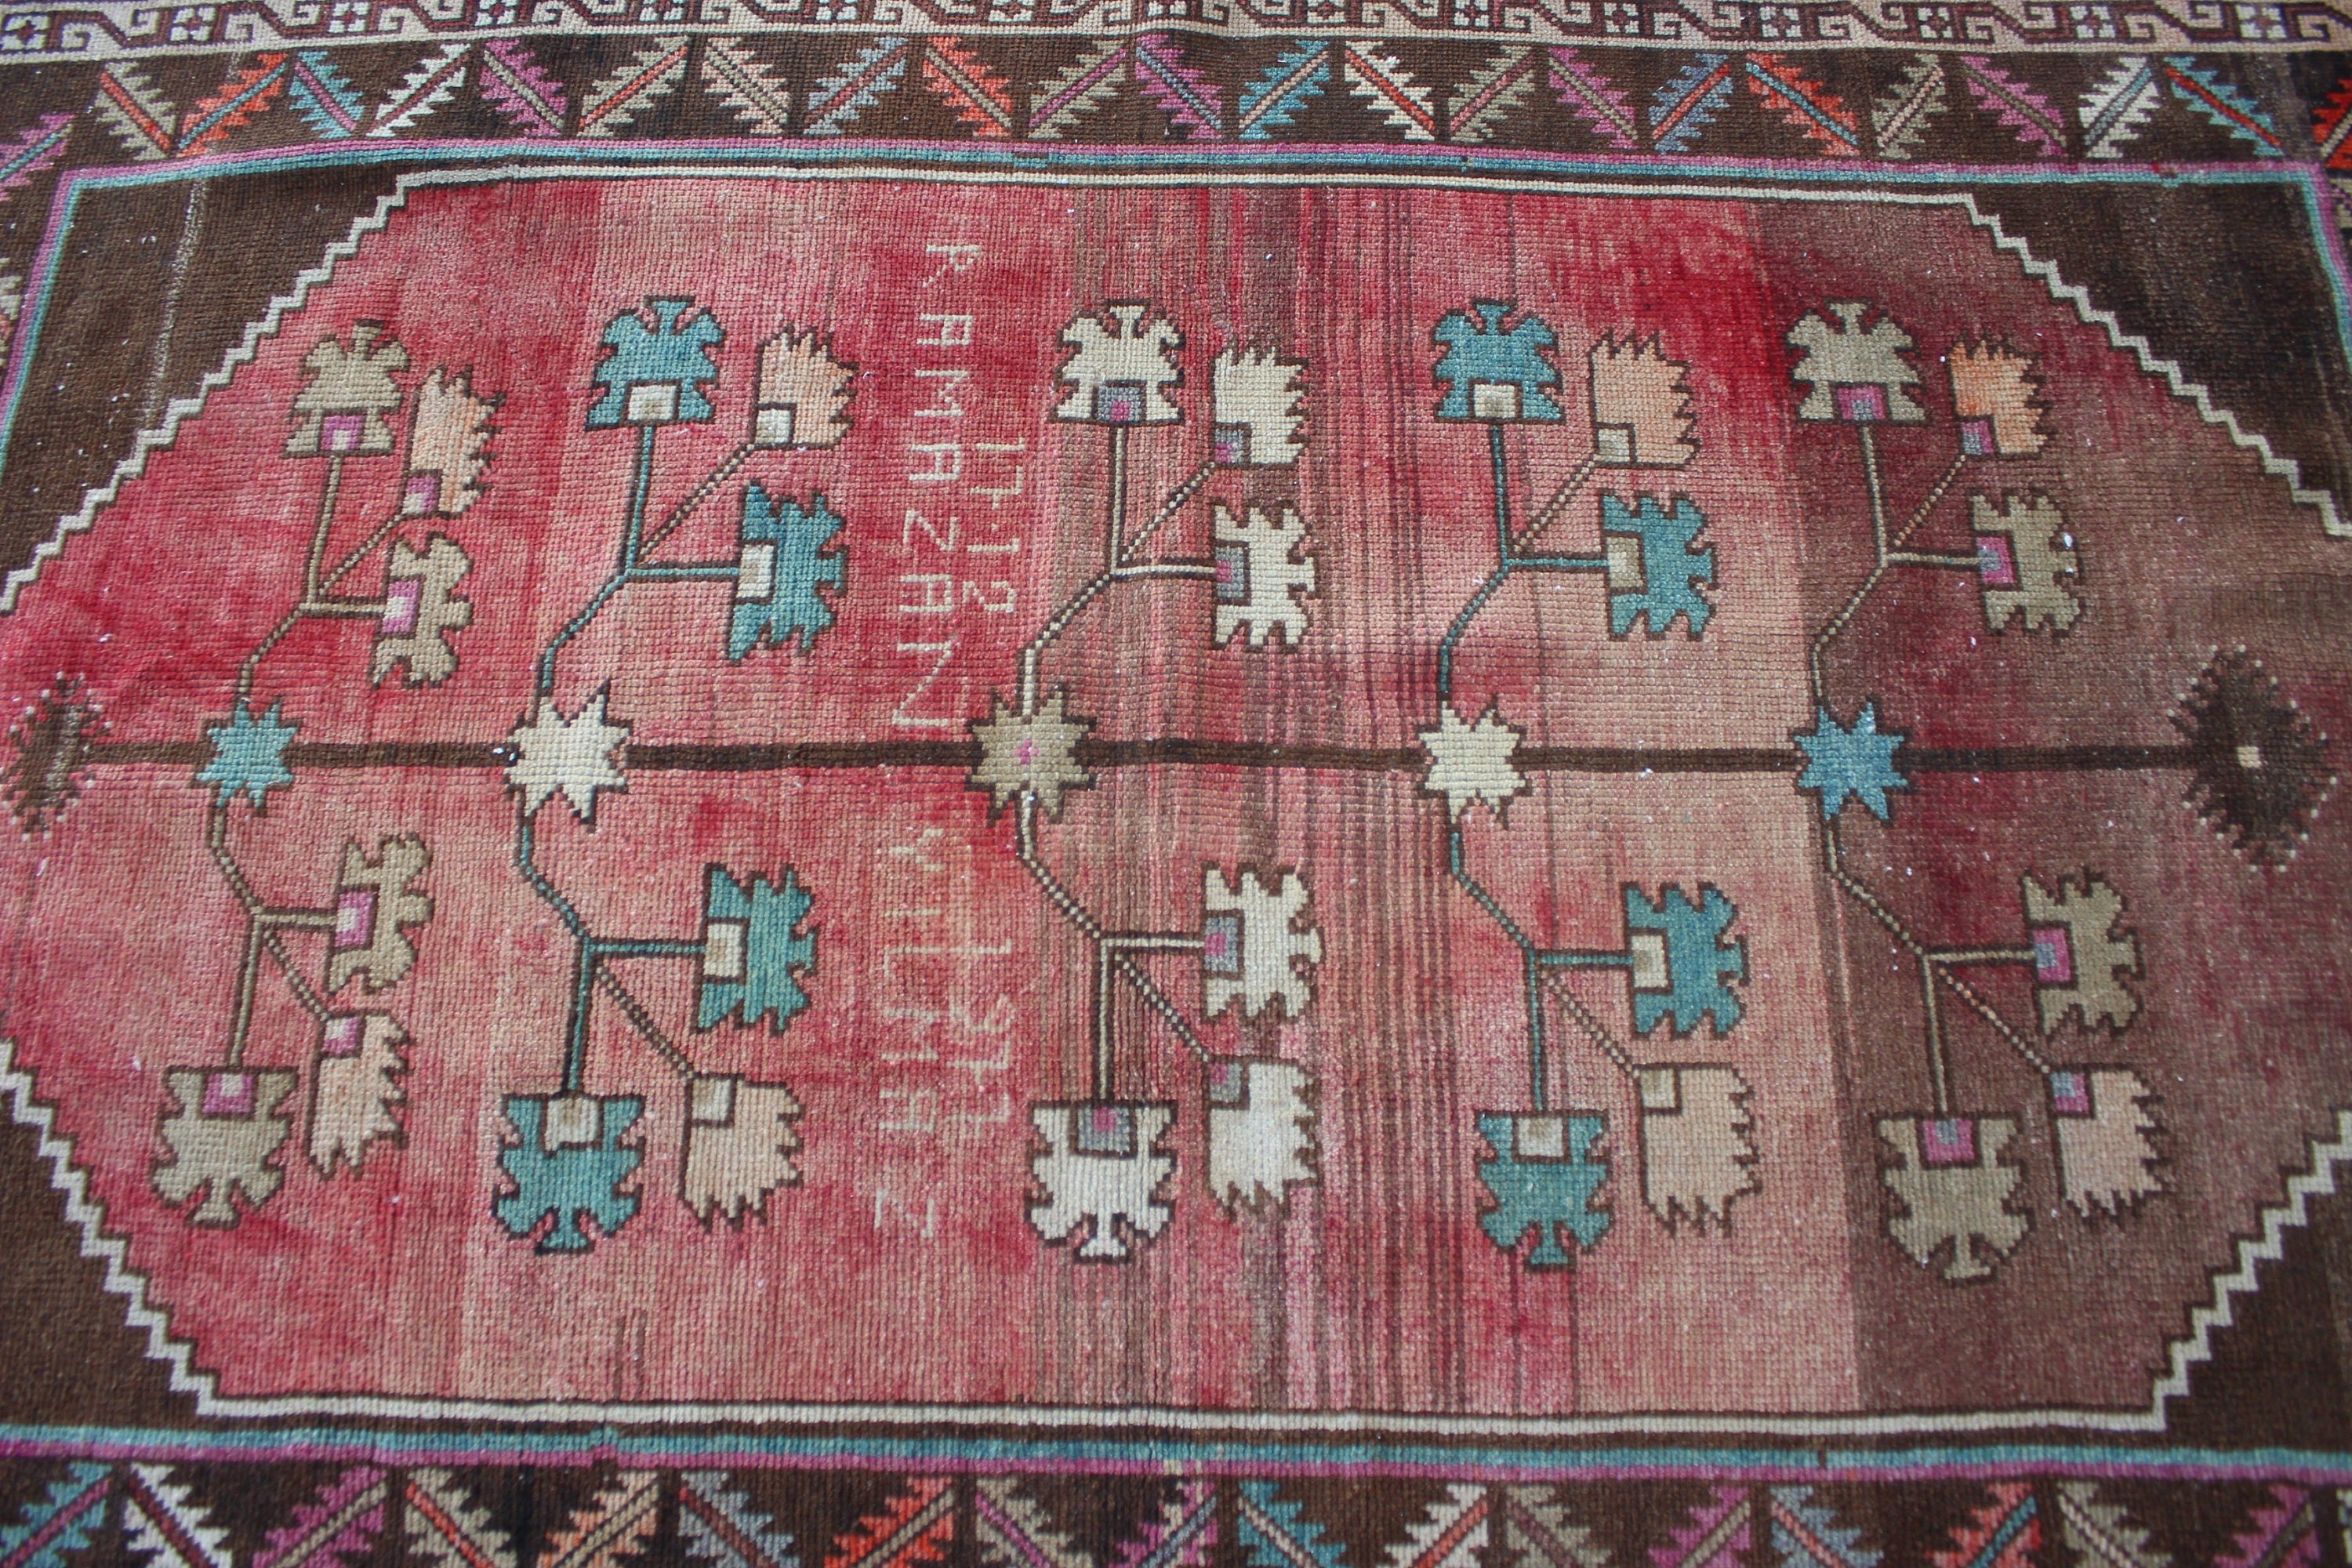 Nursery Rugs, Red  4x6.4 ft Area Rug, Cool Rug, Vintage Rugs, Rugs for Kitchen, Turkish Rugs, Bedroom Rug, Kitchen Rugs